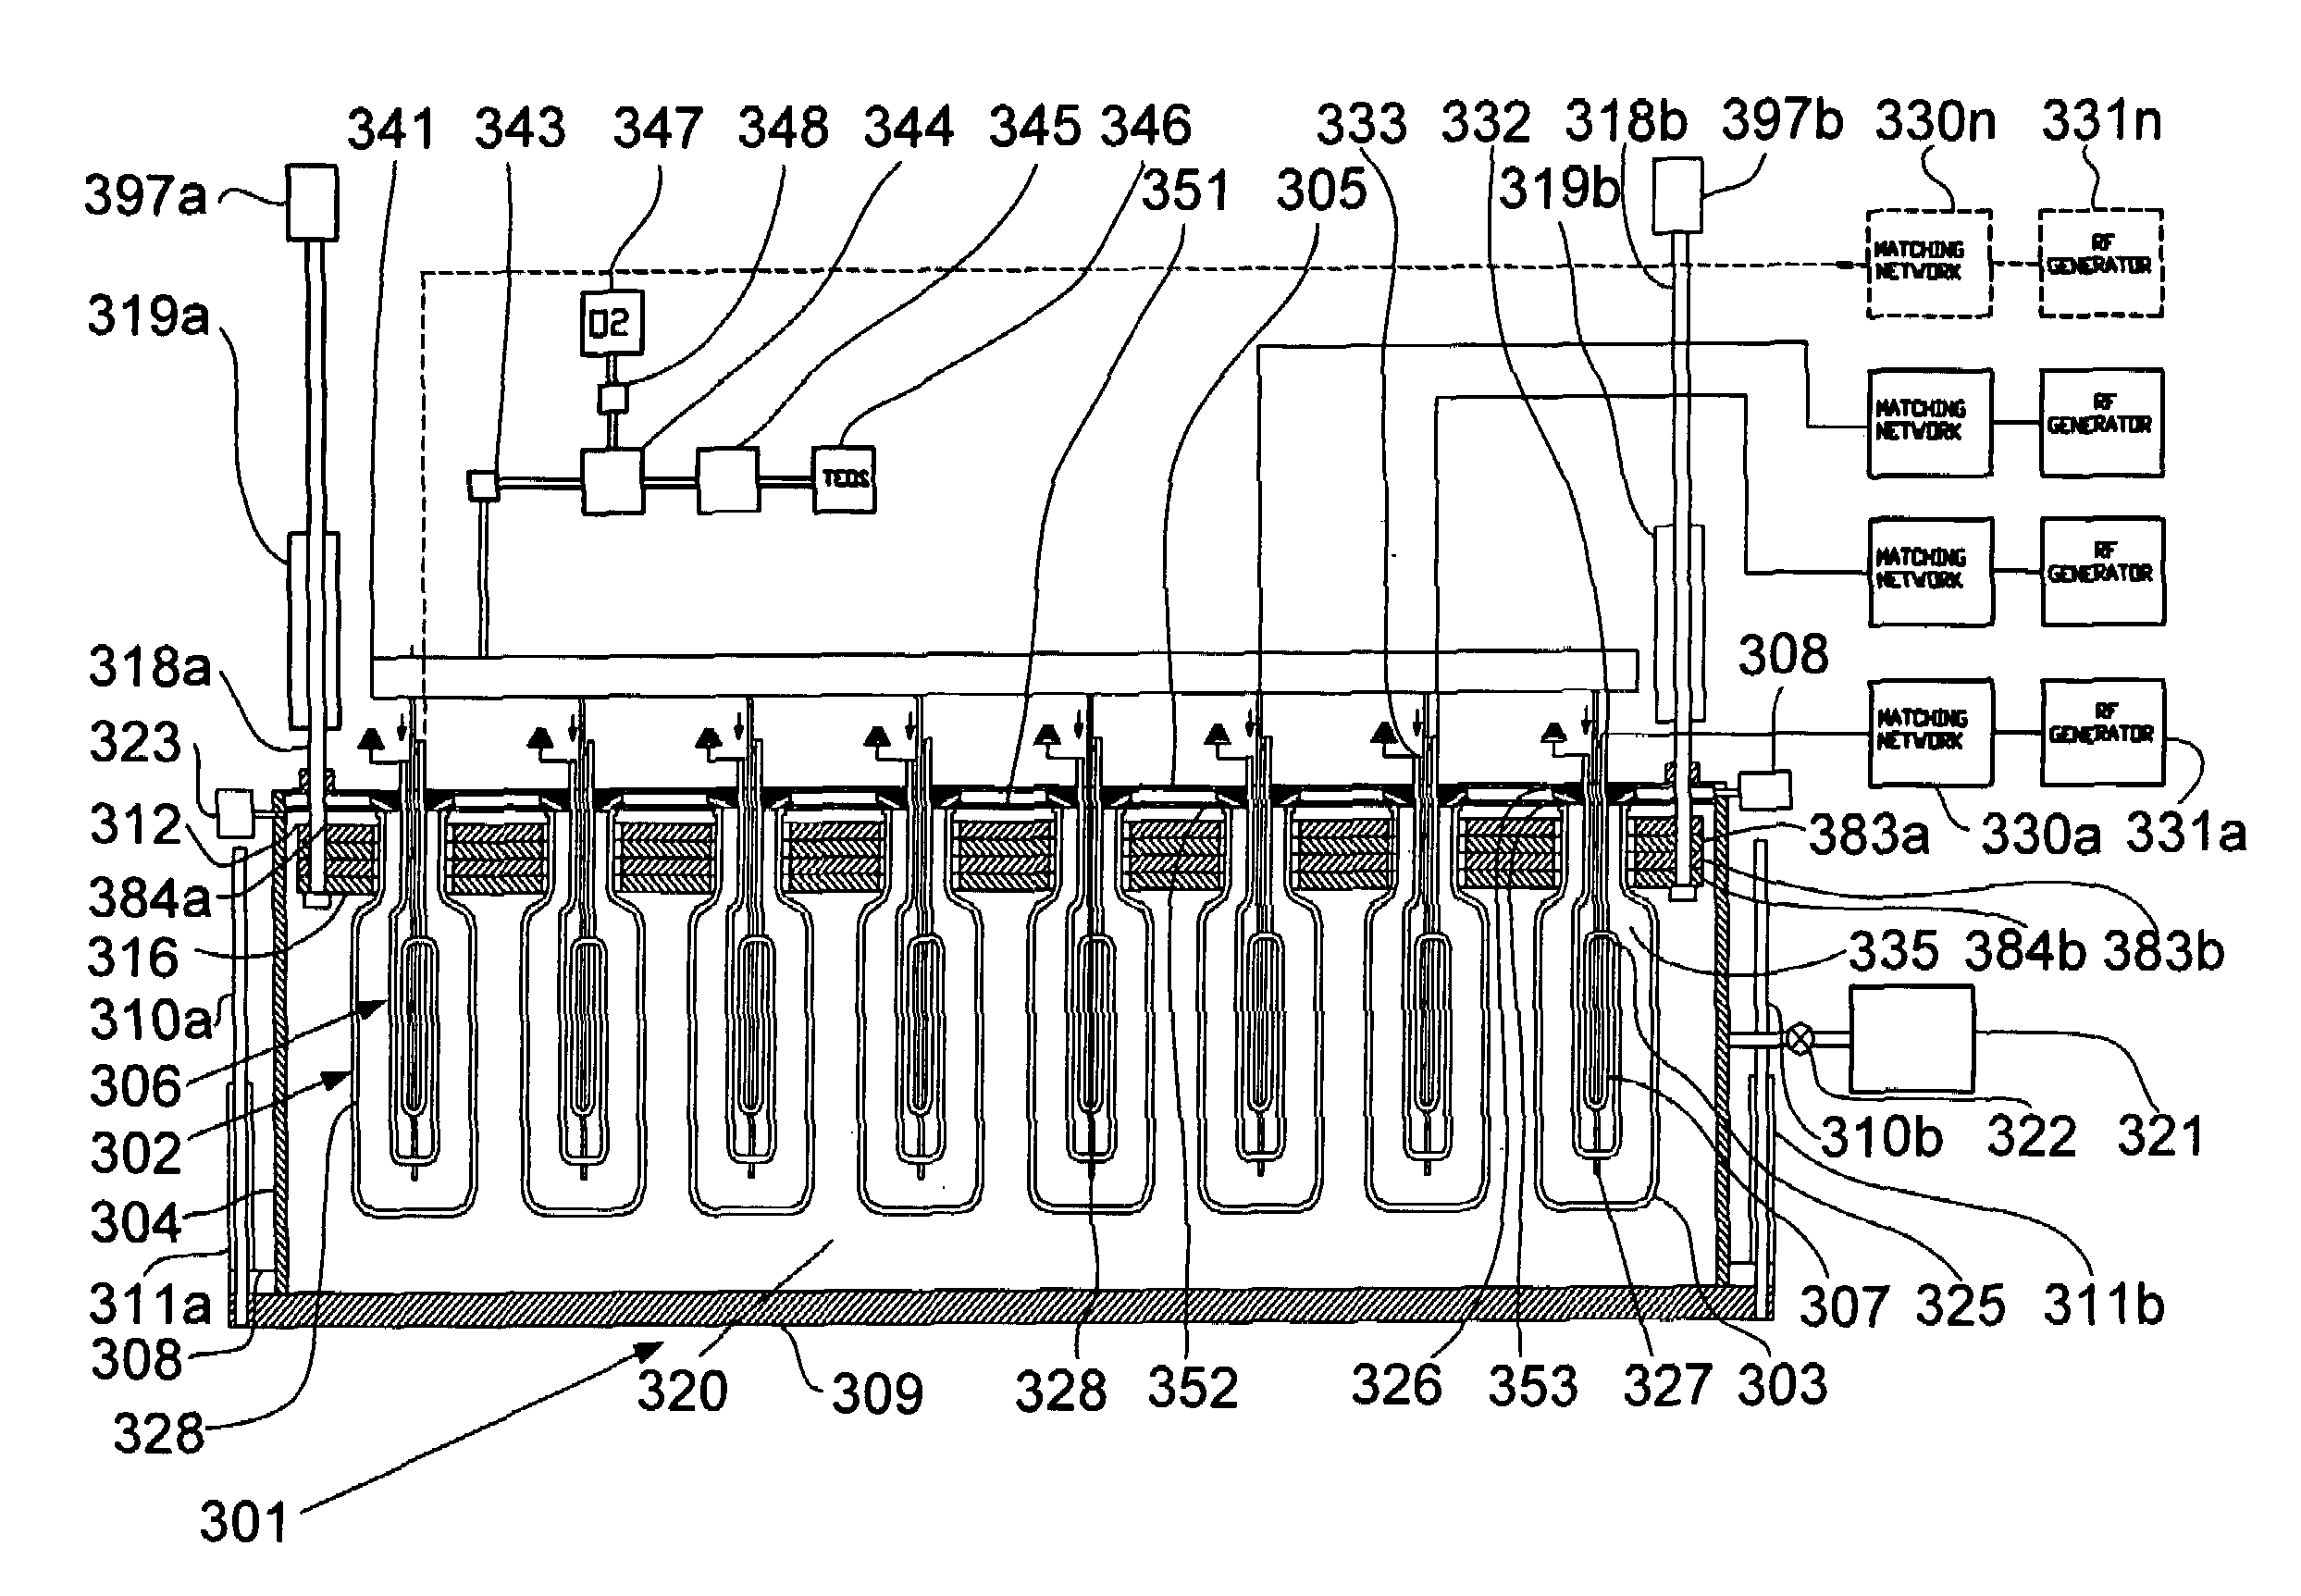 RF antenna assembly having an antenna with transversal magnetic field for generation of inductively coupled plasma